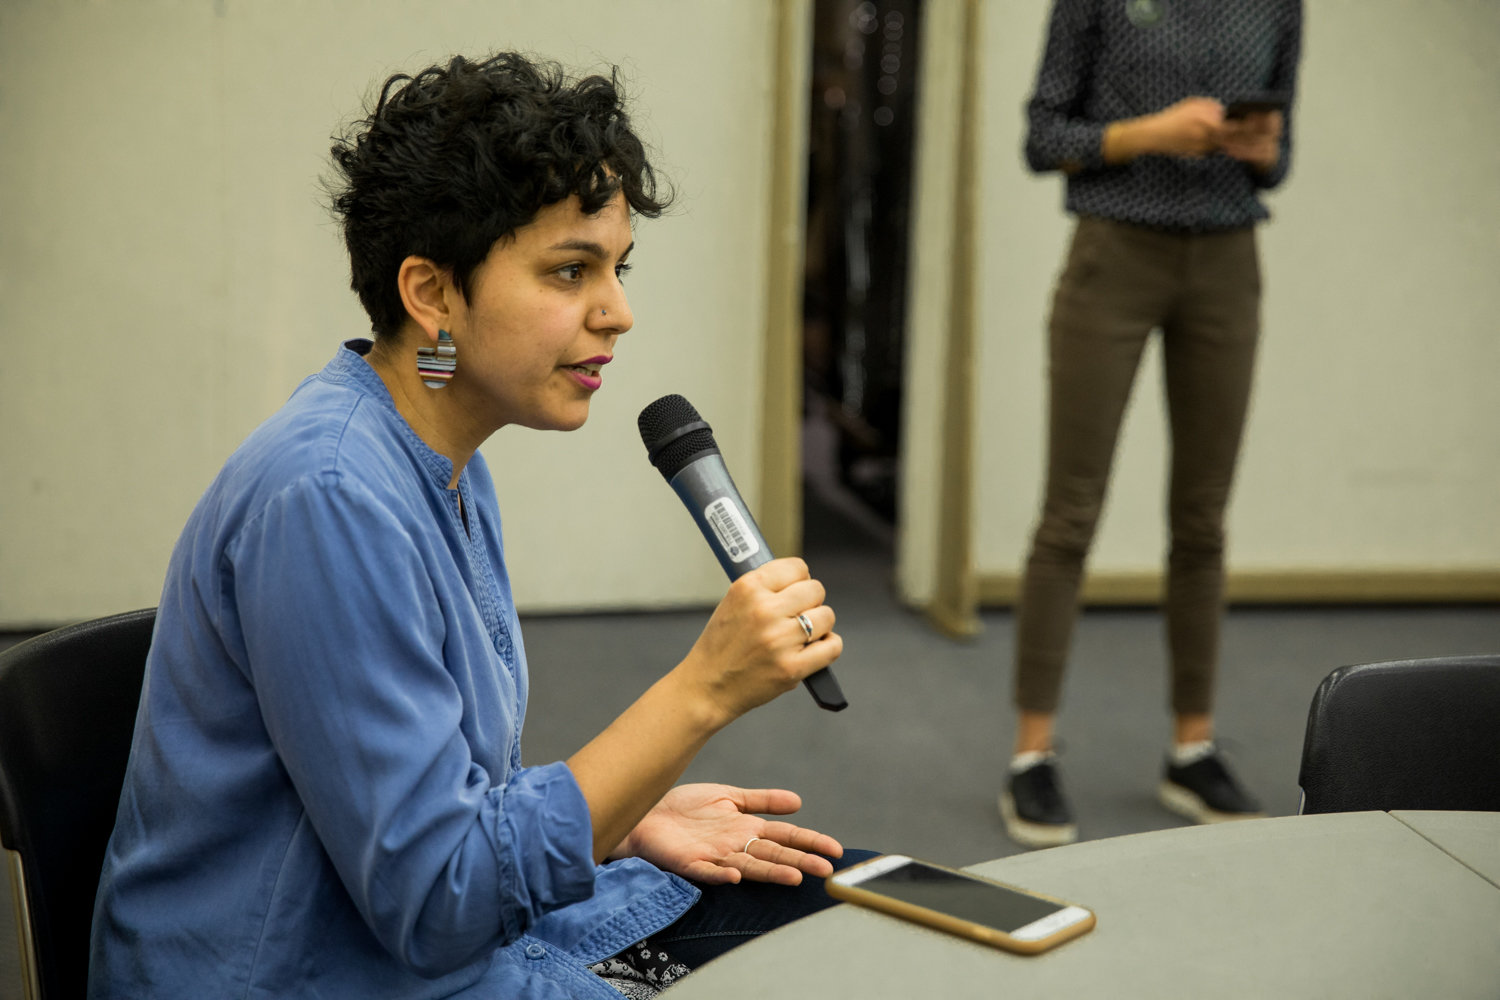 Lehman College English professor Vani Kannan talks about the importance of supporting local community organizations and how access to food is an issue for some CUNY students during a March 9 forum hosted by CUNY Rising Alliance.